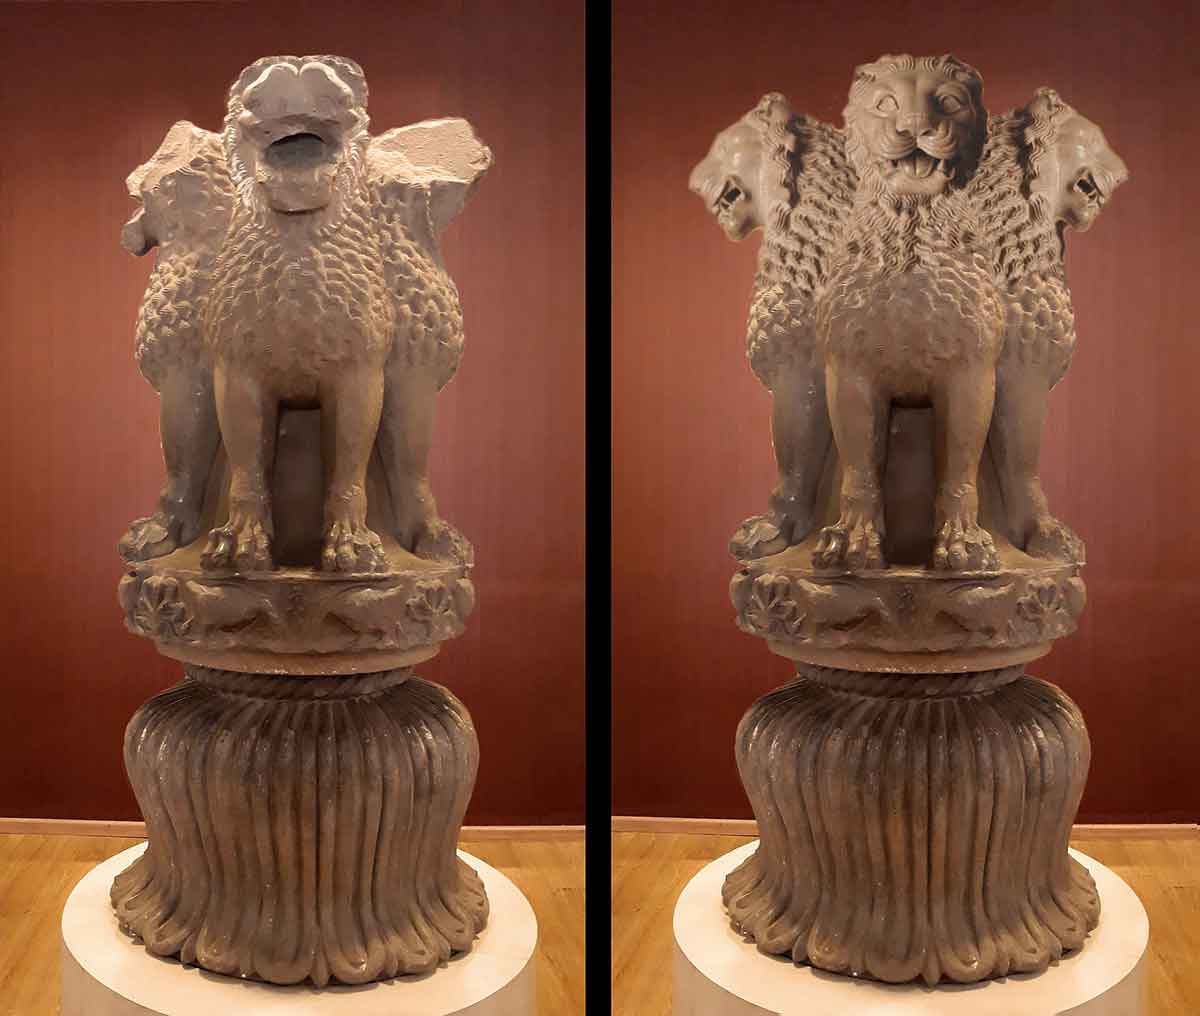 The capital of the Sanchi pillar of Ashoka, as discovered (left), and simulation of original appearance (right). Sanchi Museum. 250 BCE.